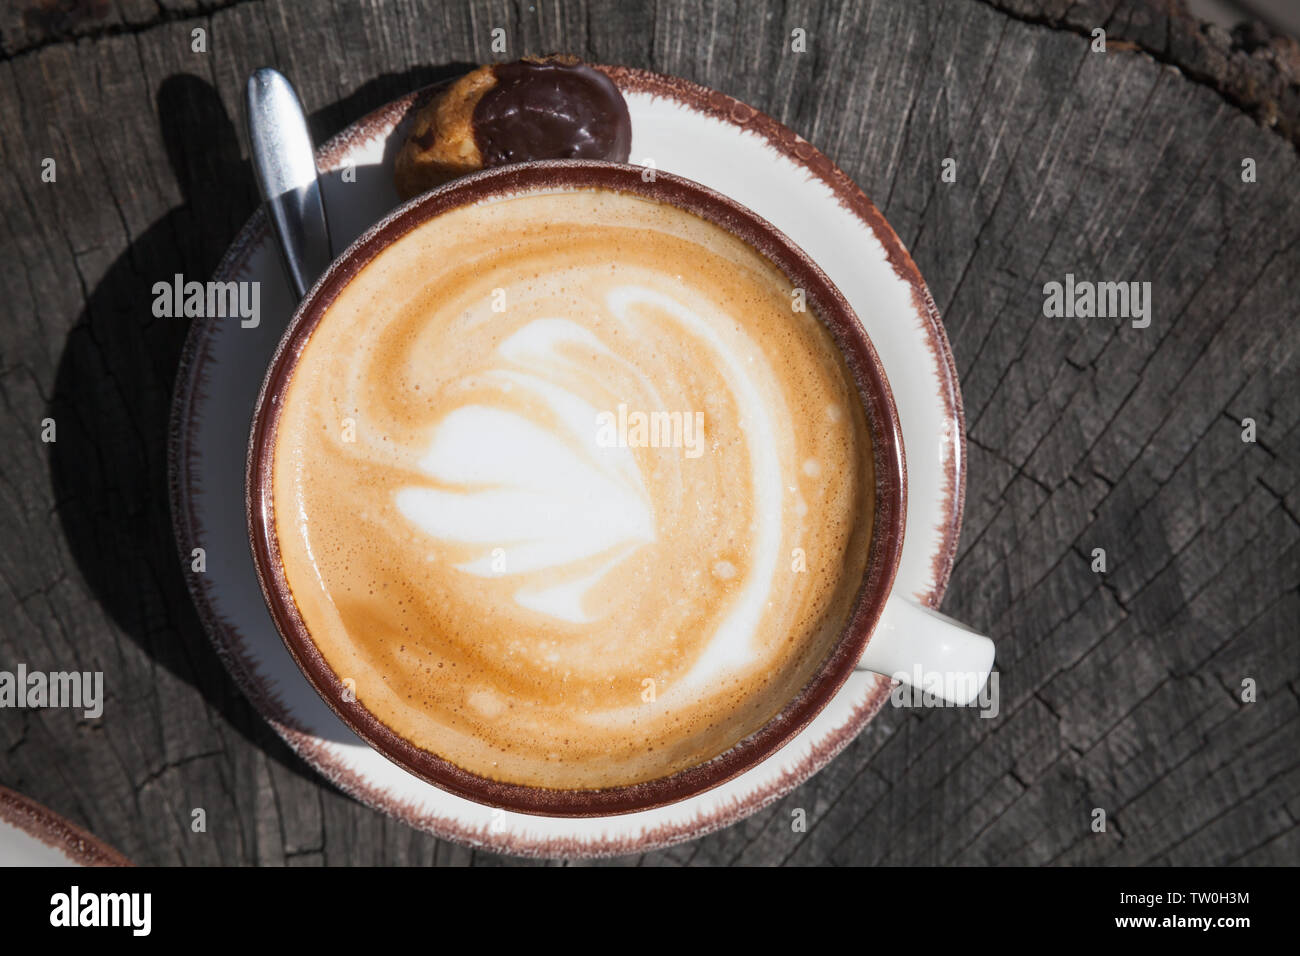 Cappuccino coffee, top view. Cup of coffee with milk foam stands on vintage wooden table Stock Photo